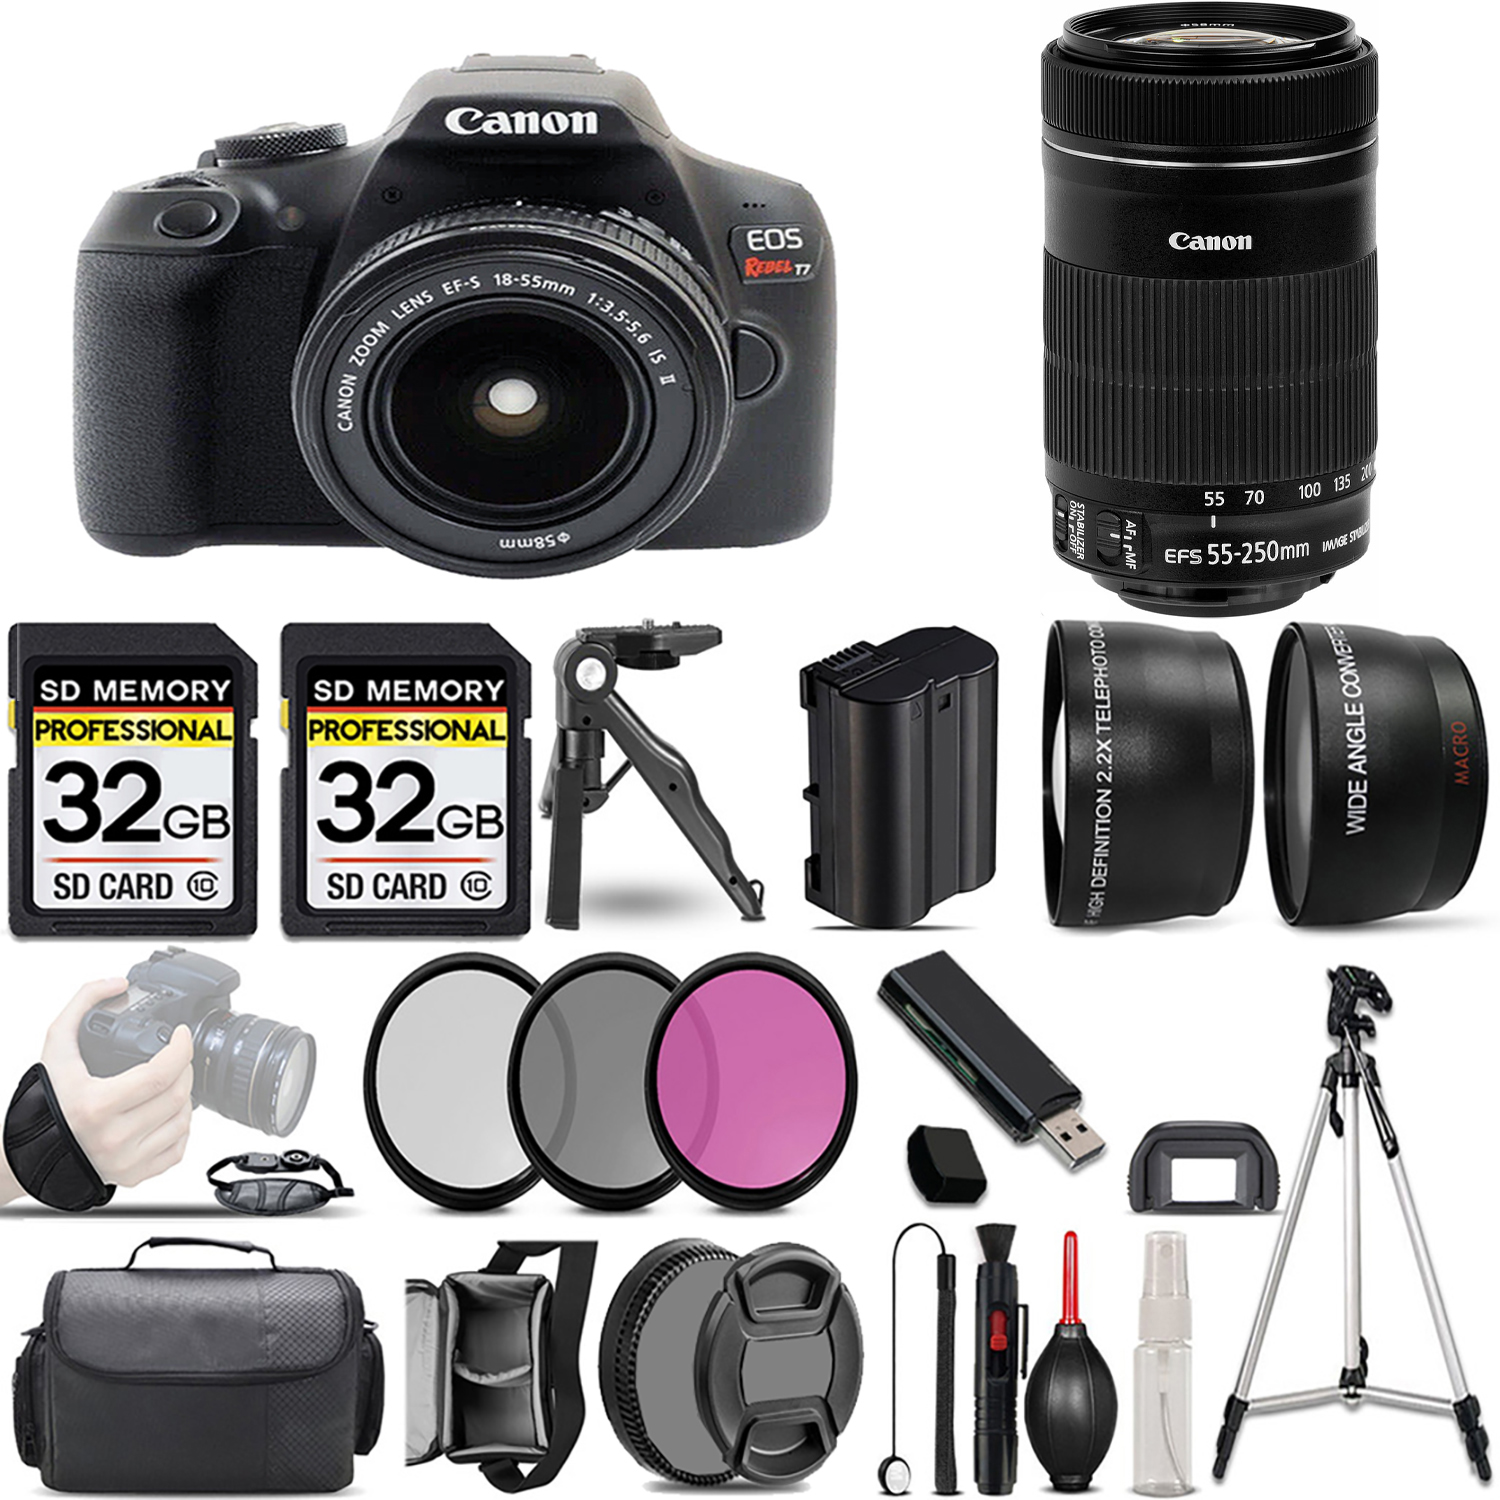 EOS Rebel T7 with 18-55mm Lens + 55-250mm IS STM Lens + 3 Piece Filter Set + 64GB *FREE SHIPPING*